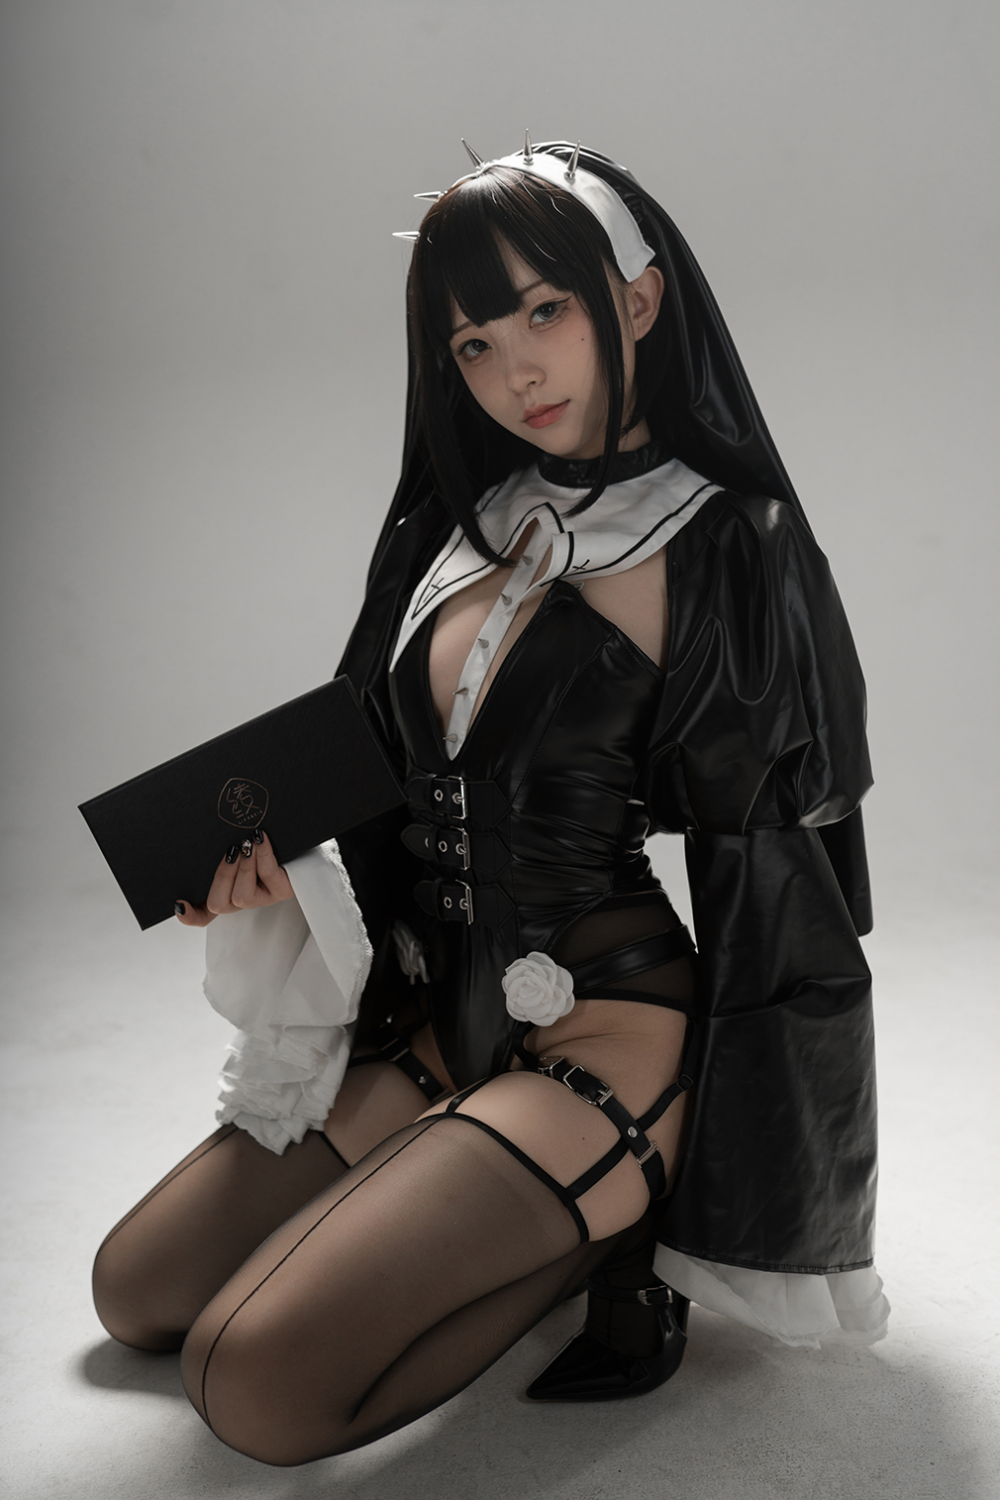 Hot Anime Cosplay Porn - Cosplay Anime Asian Girl with Hot Lingerie - Porn - EroMe